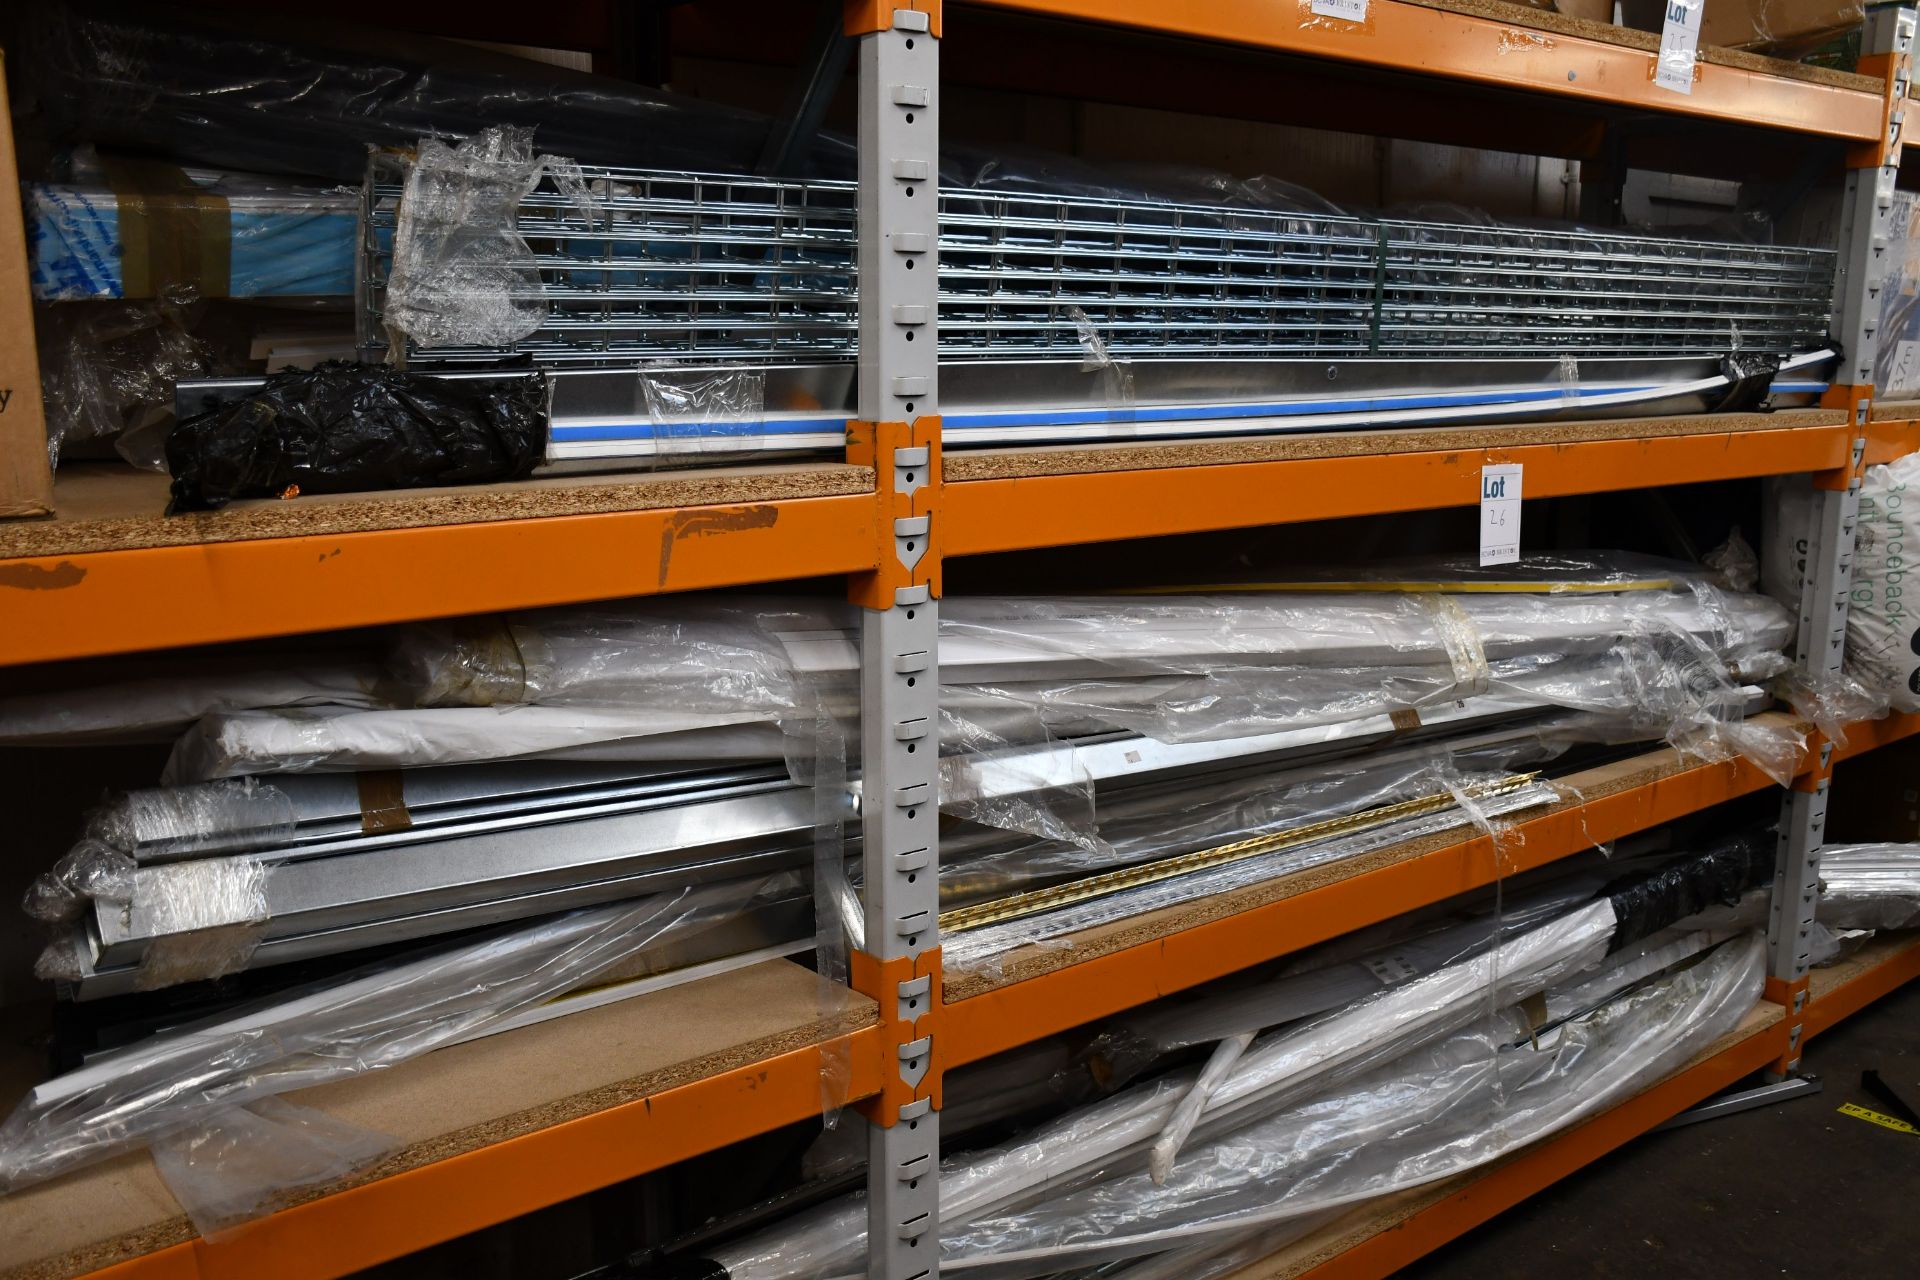 A shelf of miscellaneous items to include plastic tubing and metal support brackets.